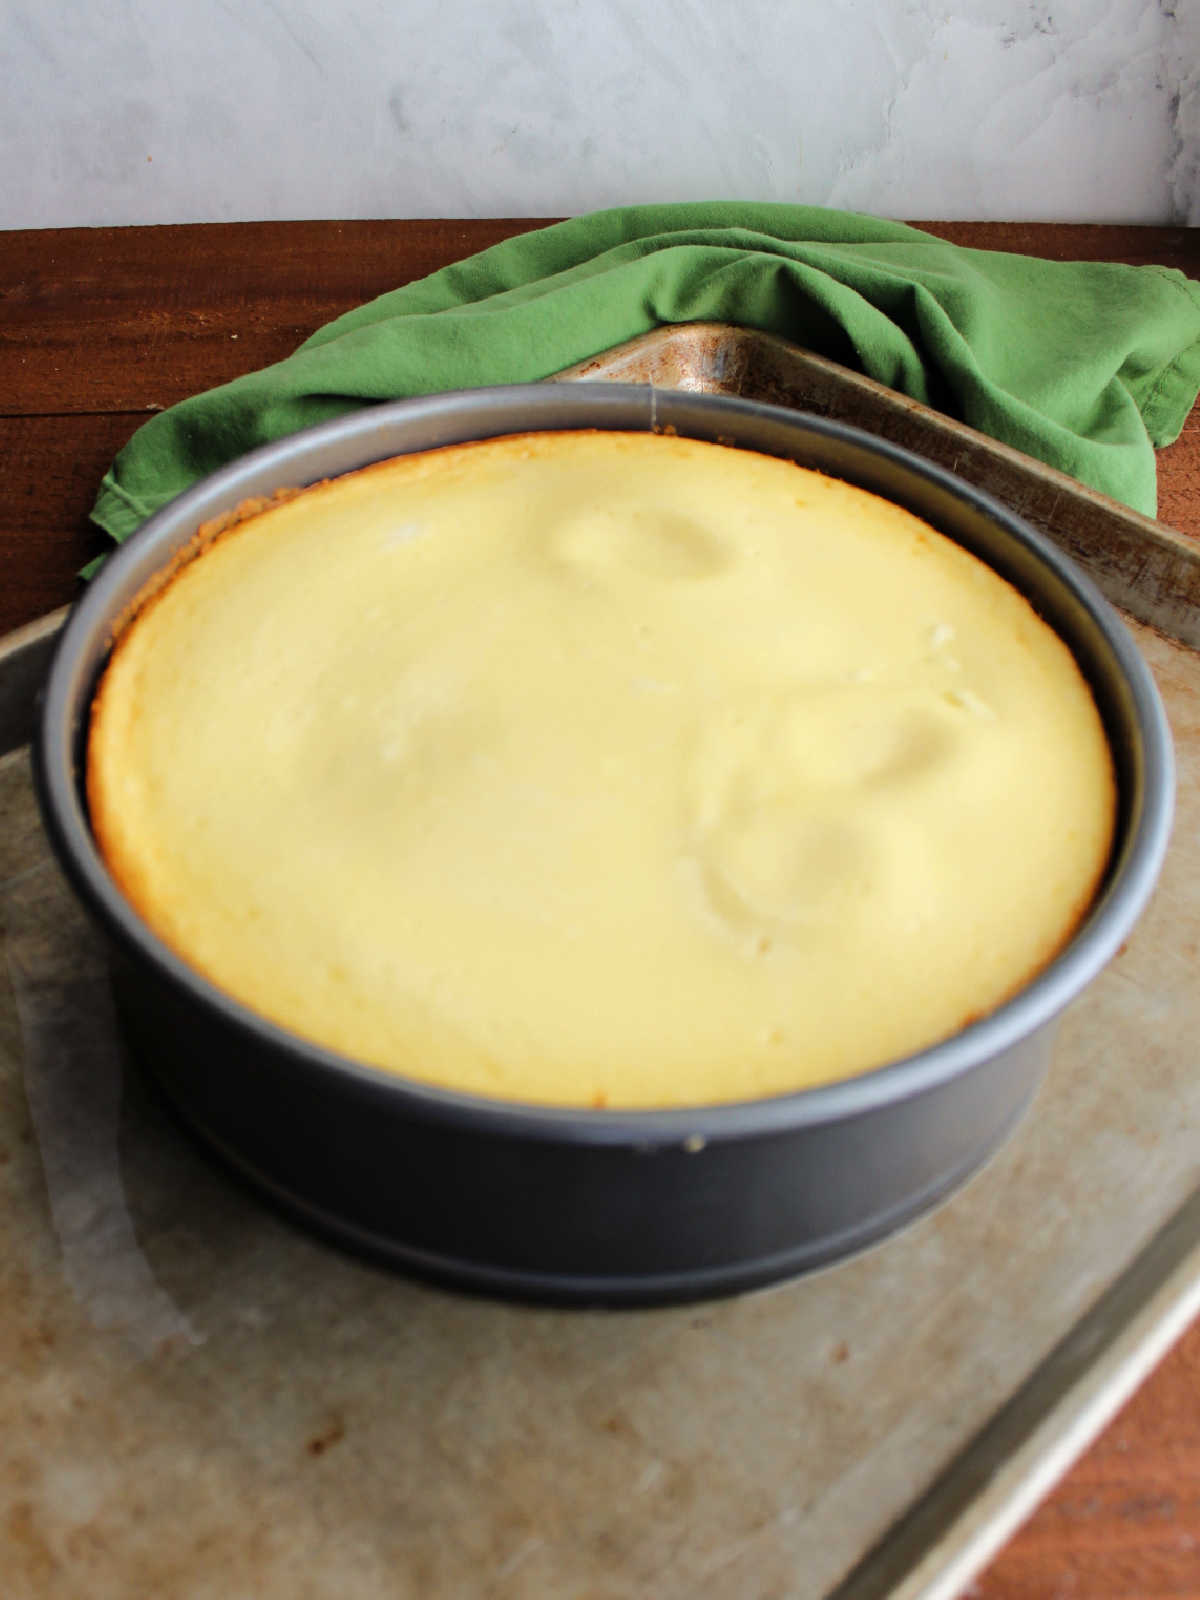 Baked cheesecake fresh from the oven. 